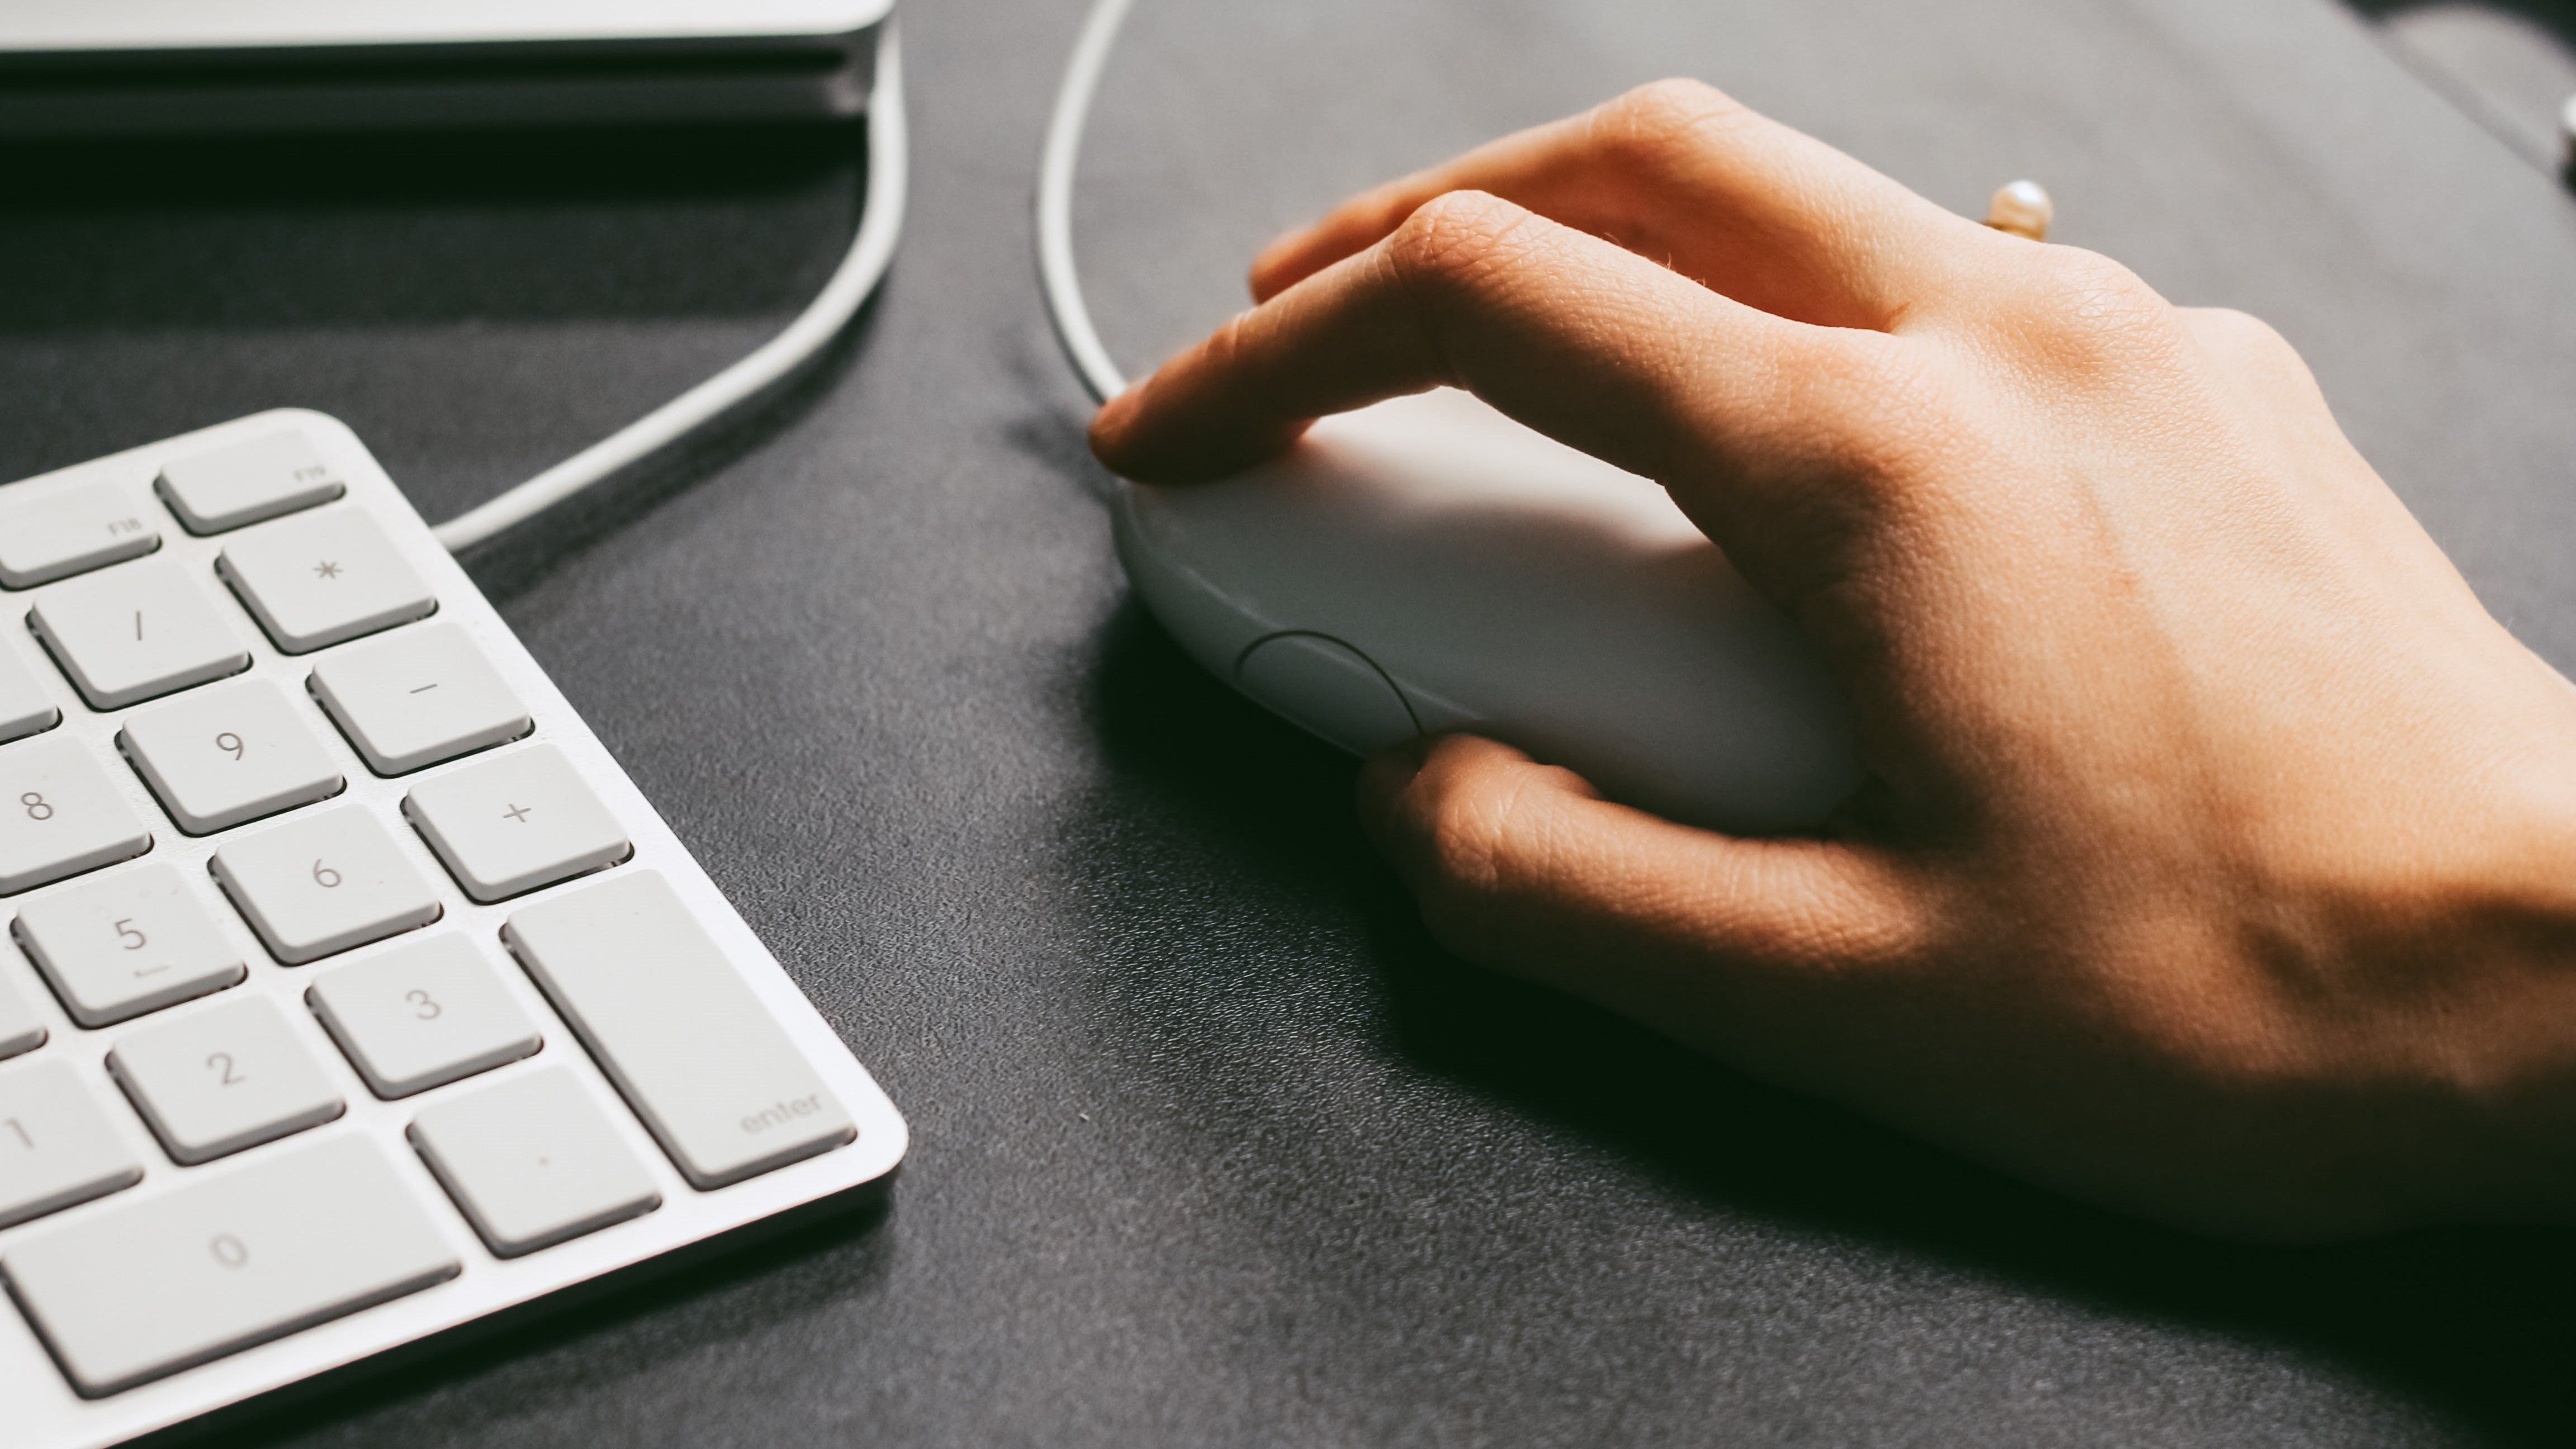 Hand on a mouse next to a keyboard